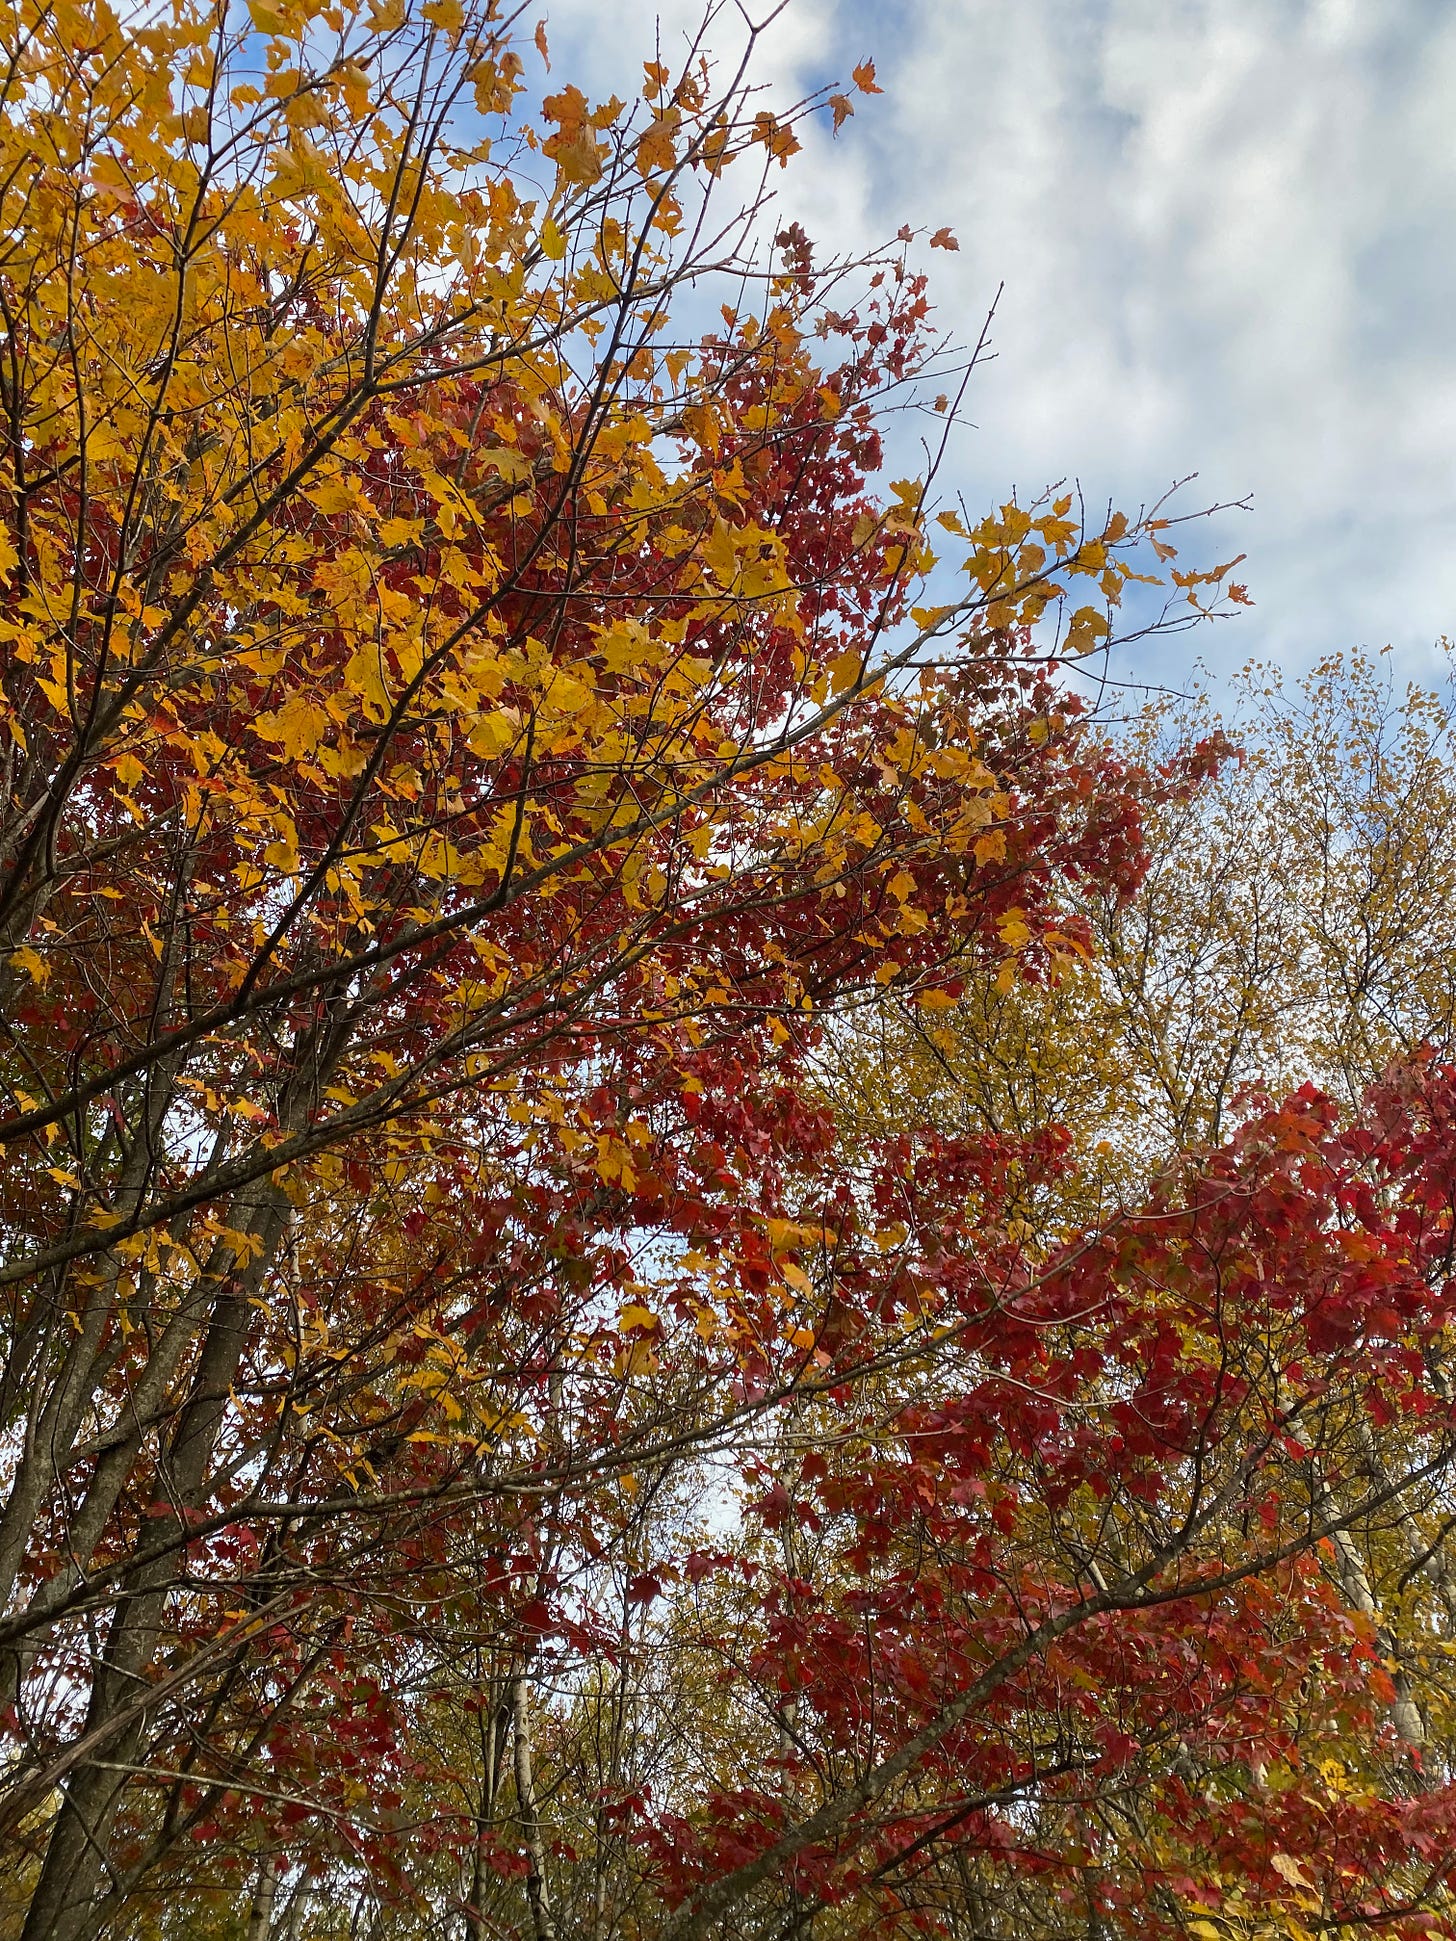 A tangle of green, orange, and red branches against a pale and cloudy sky.